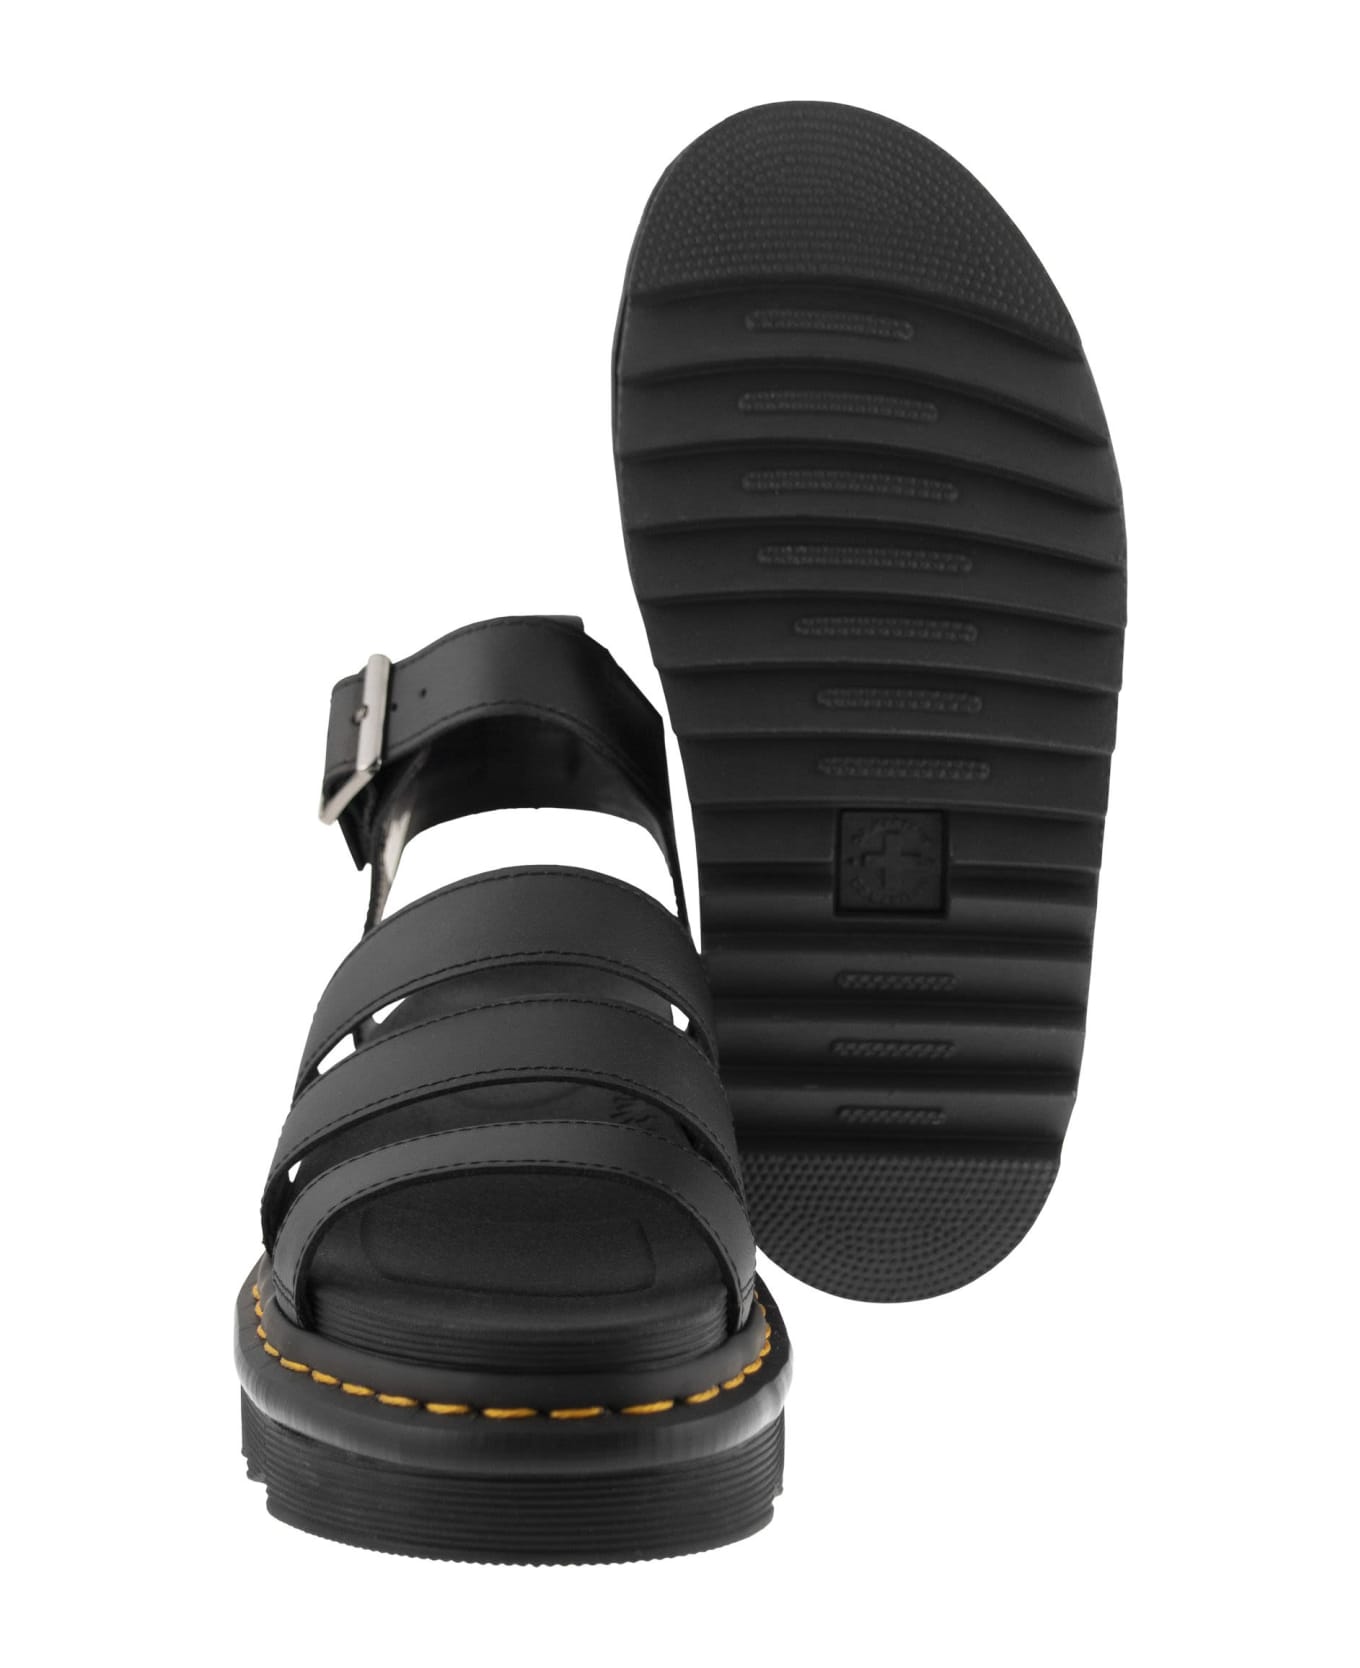 Dr. Martens Blaire Leather Sandals With Straps - Black サンダル